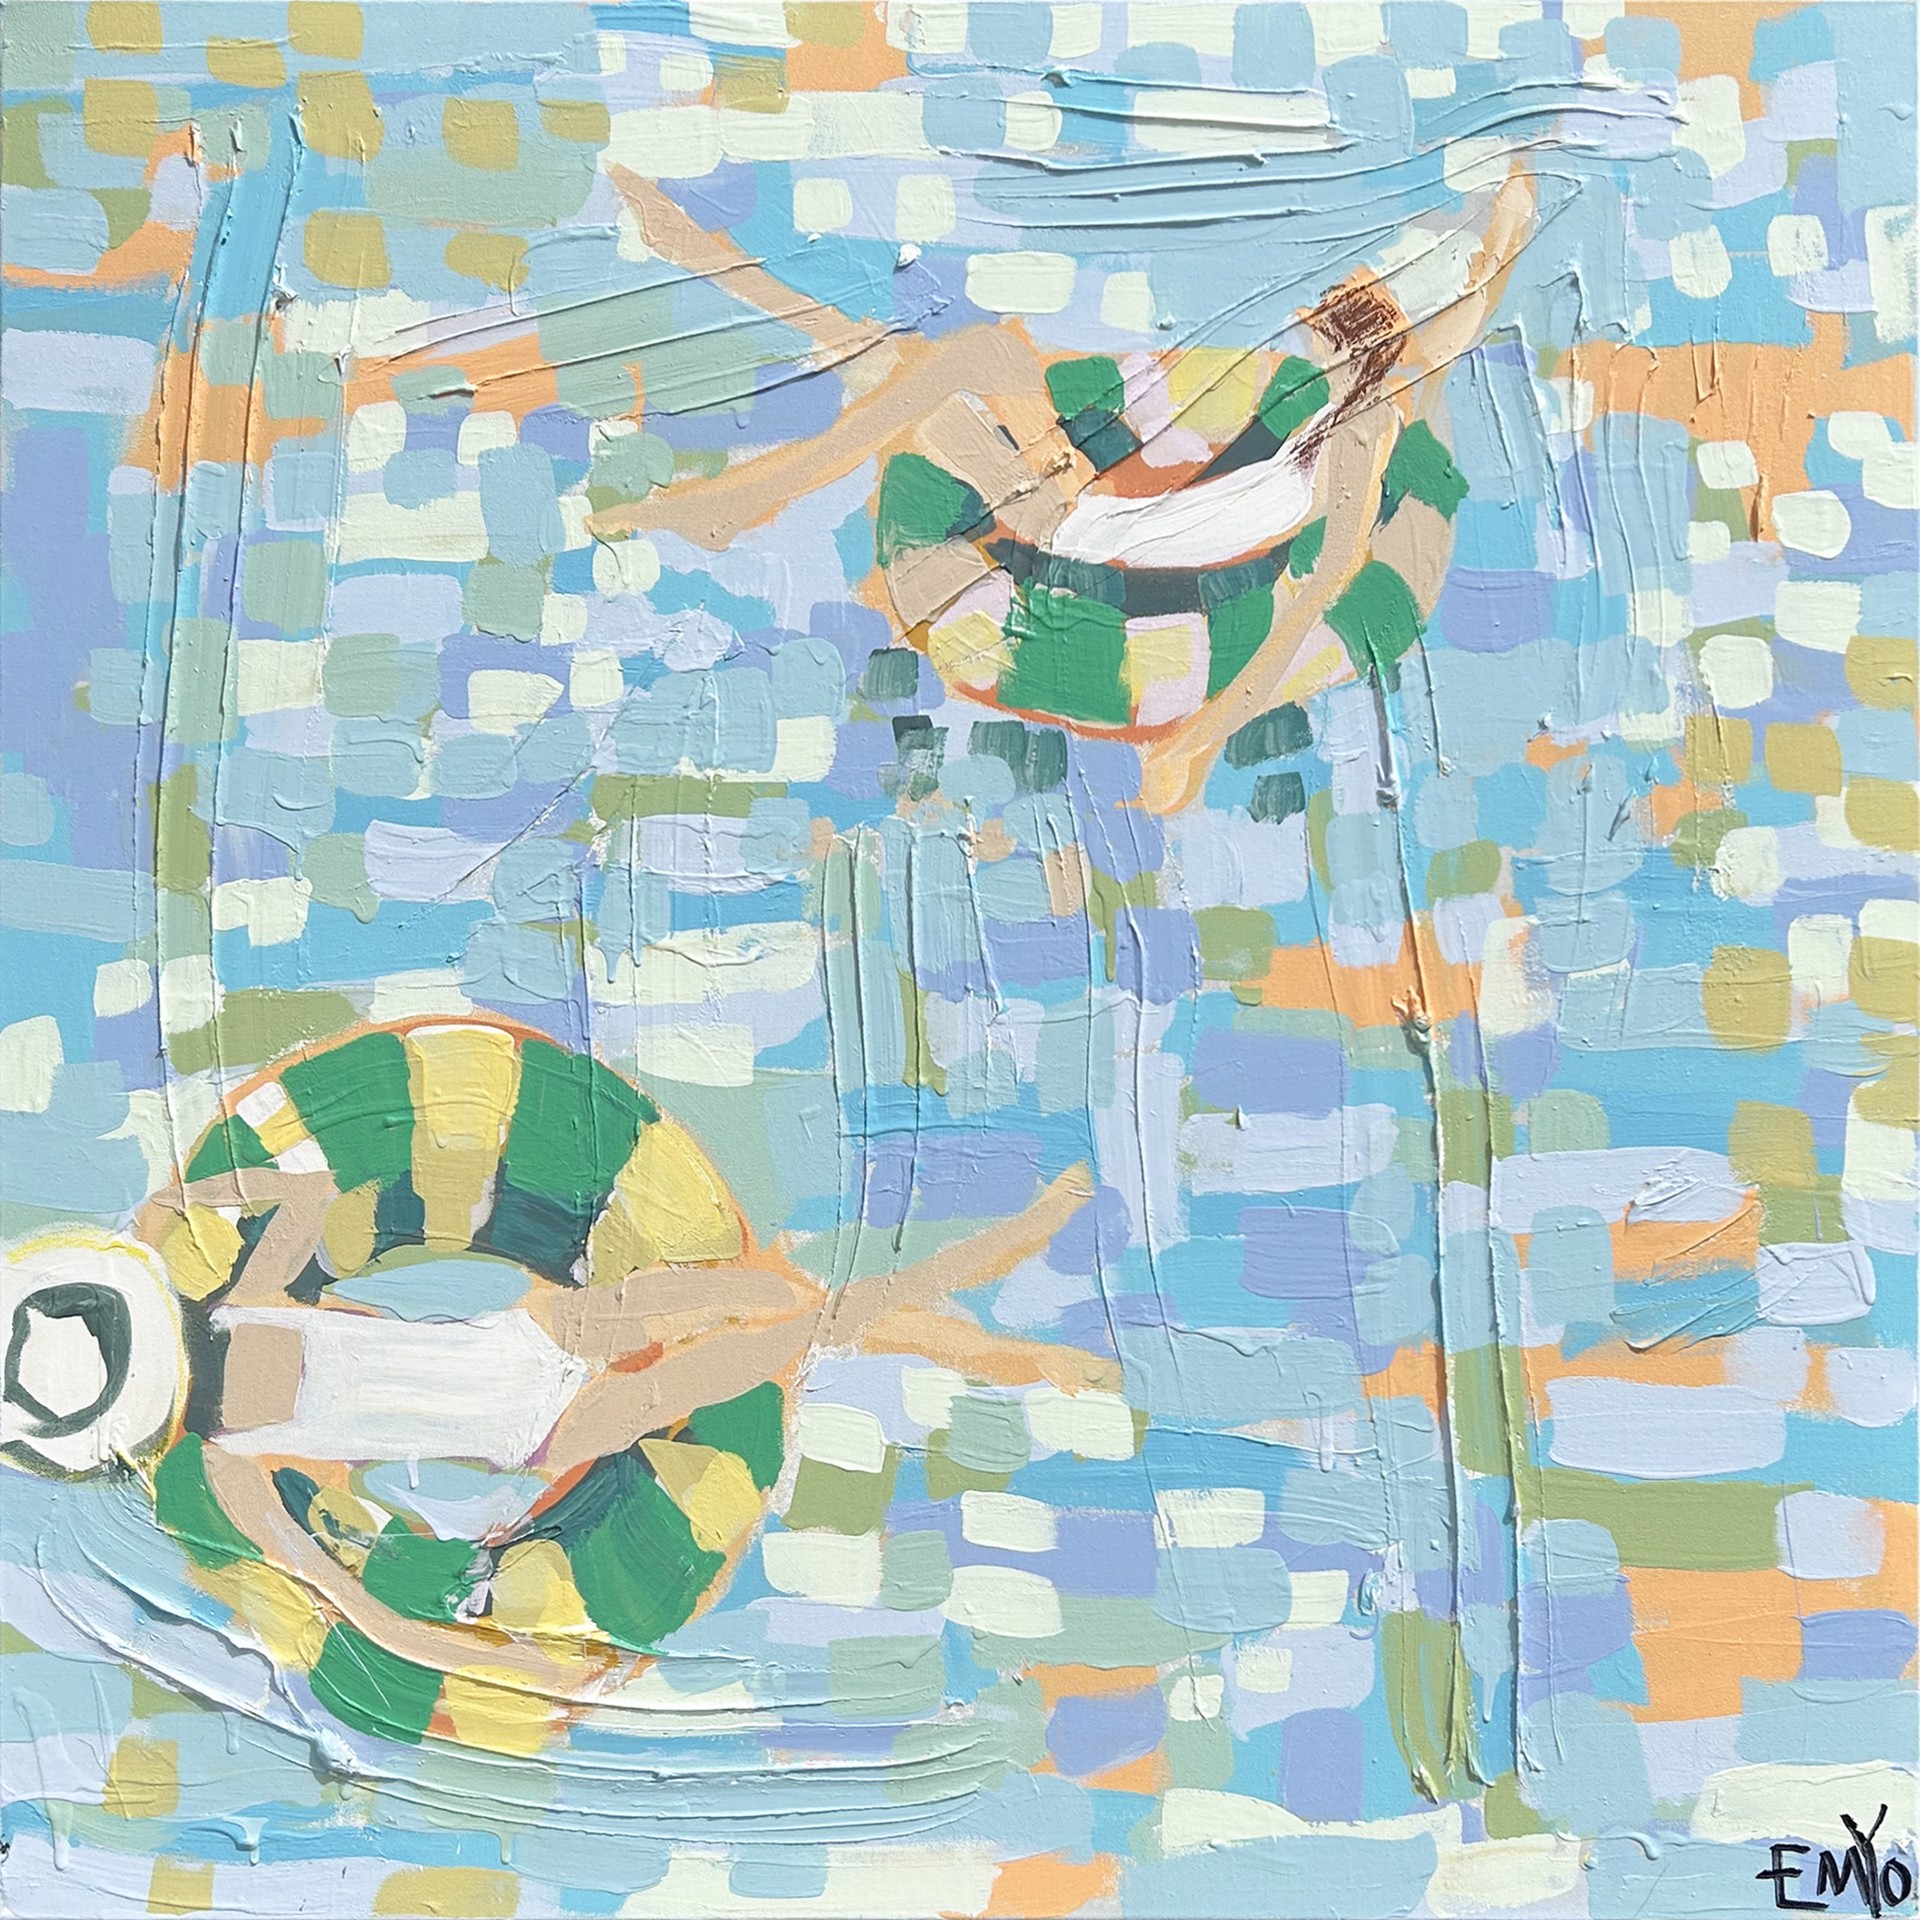 Floating With You on the Big Wide Blue 2 by Emyo